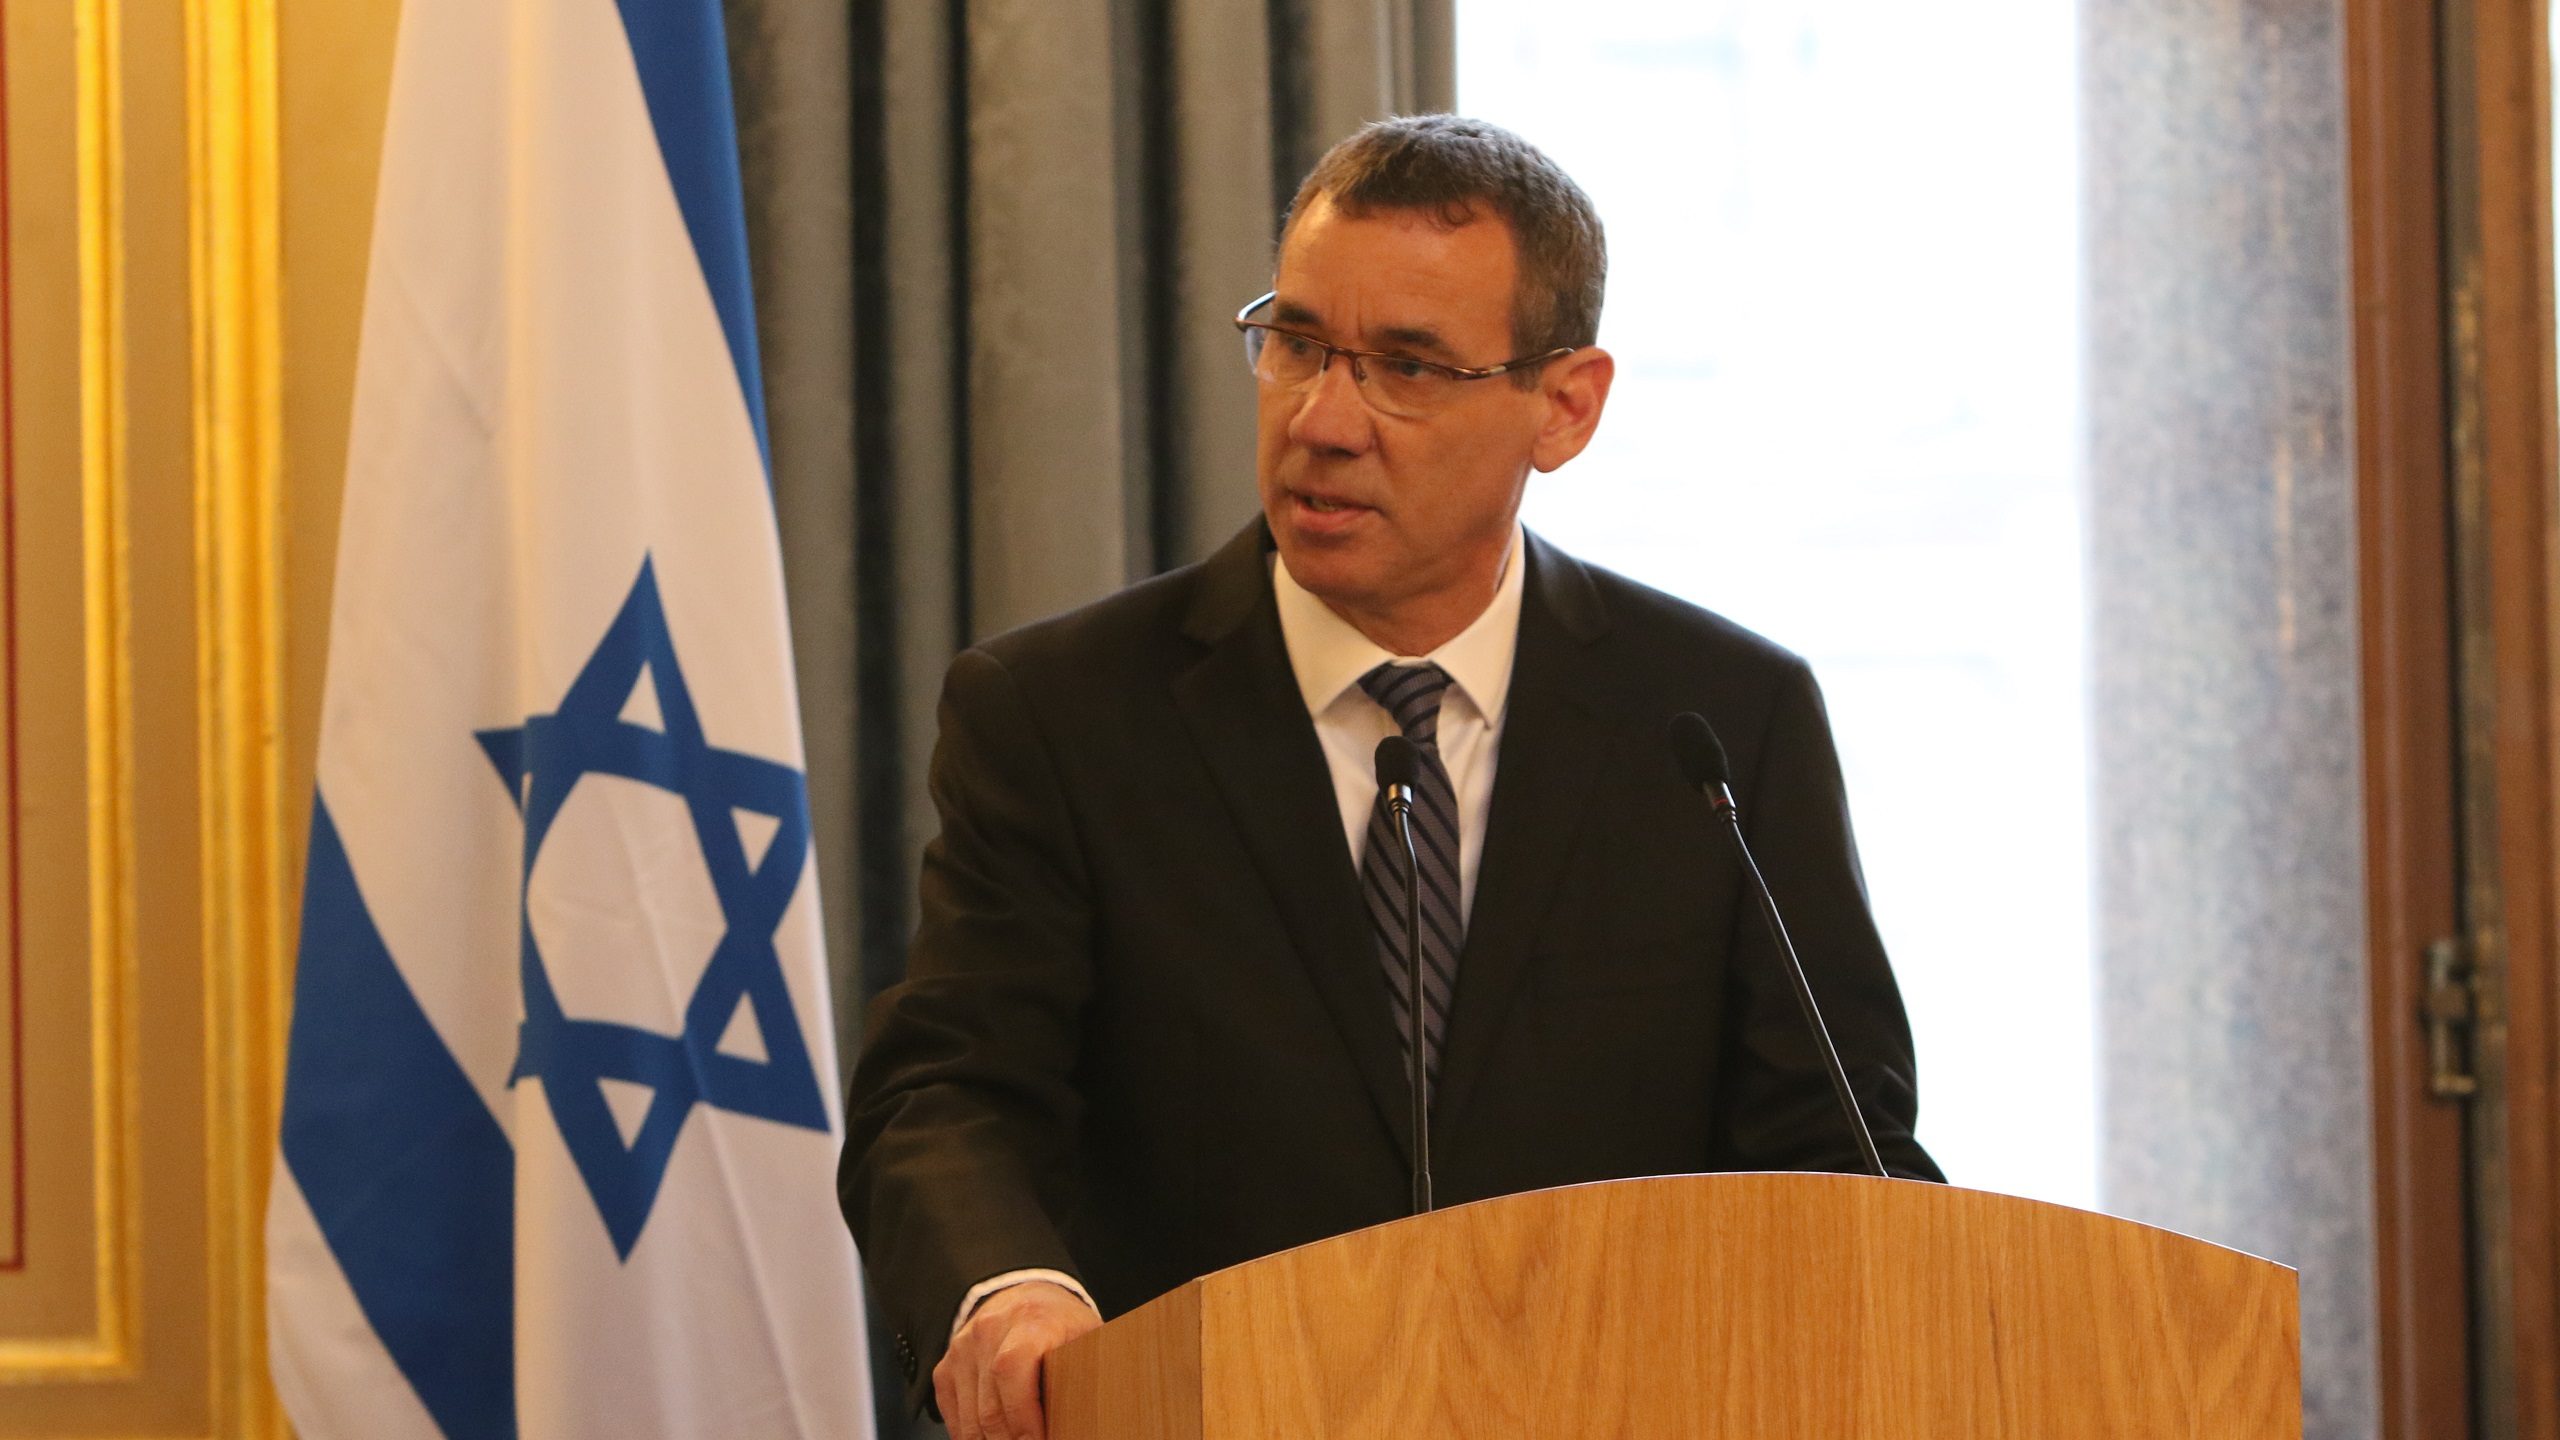 Ambassador Mark Regev to TML: If Military Action on Iran Is Necessary, Israel Could Go It Alone